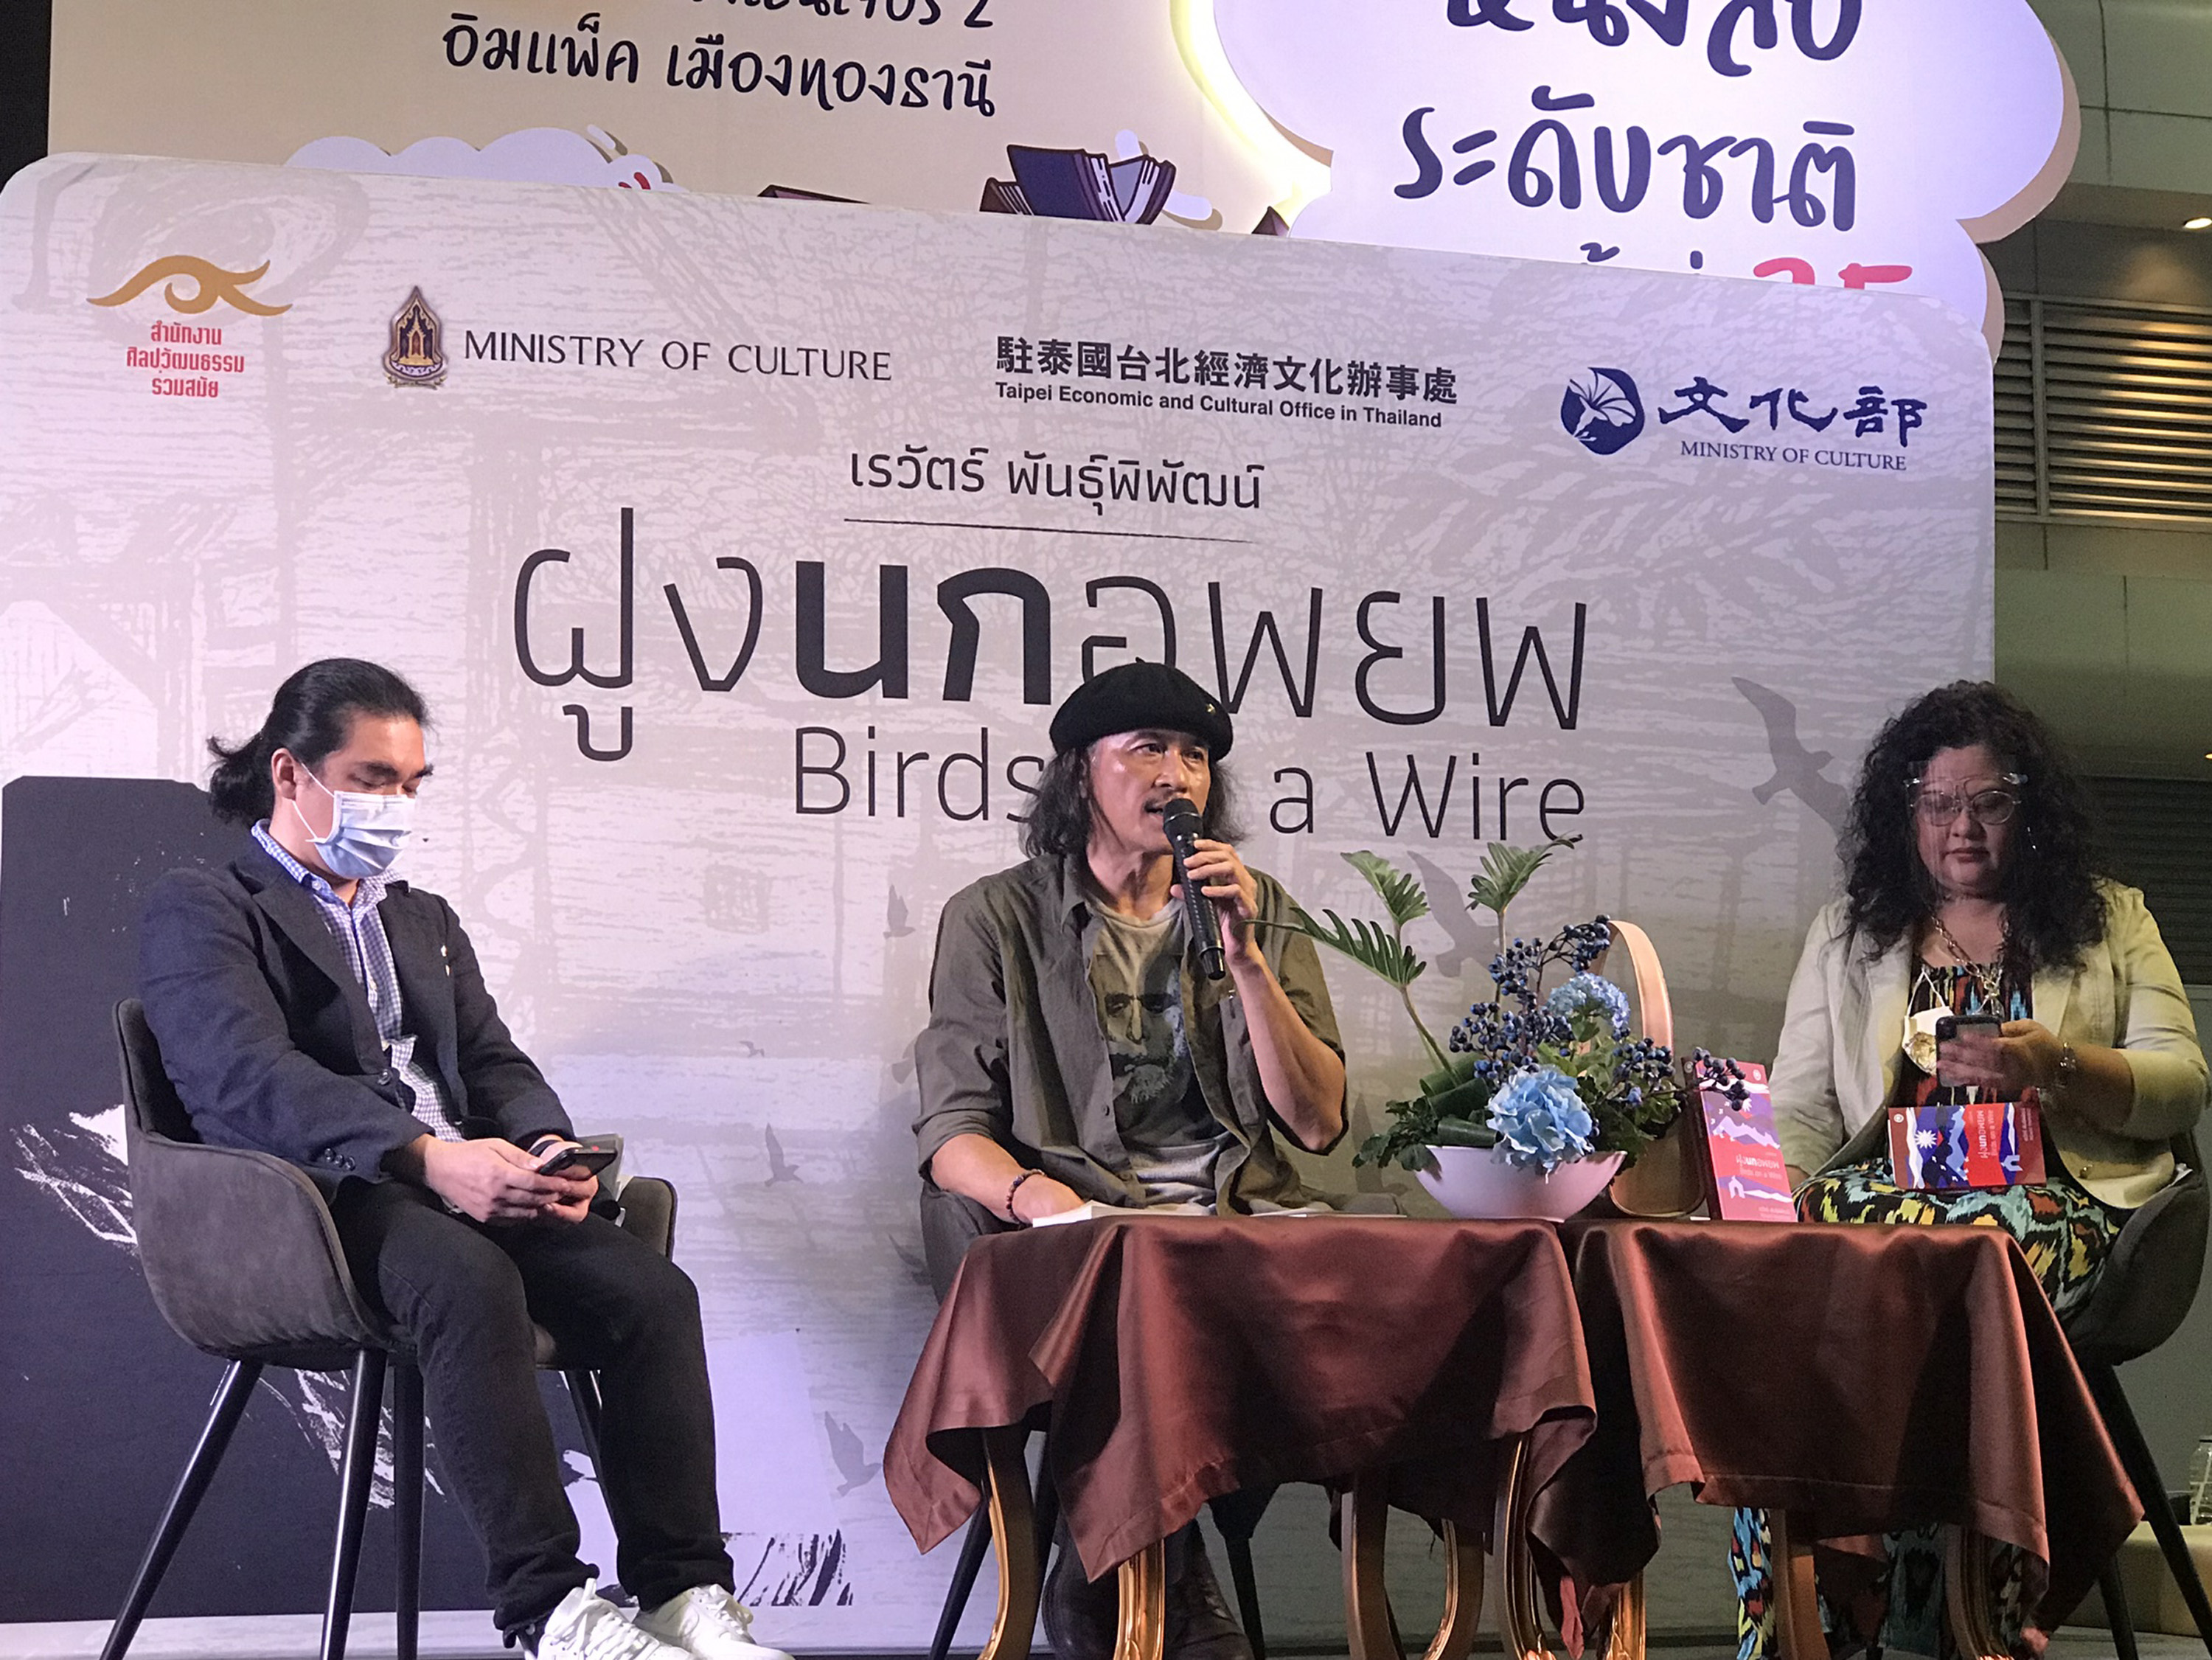 Thai novelist holds book-signing event for new book inspired by lives of migrant workers in Taiwan